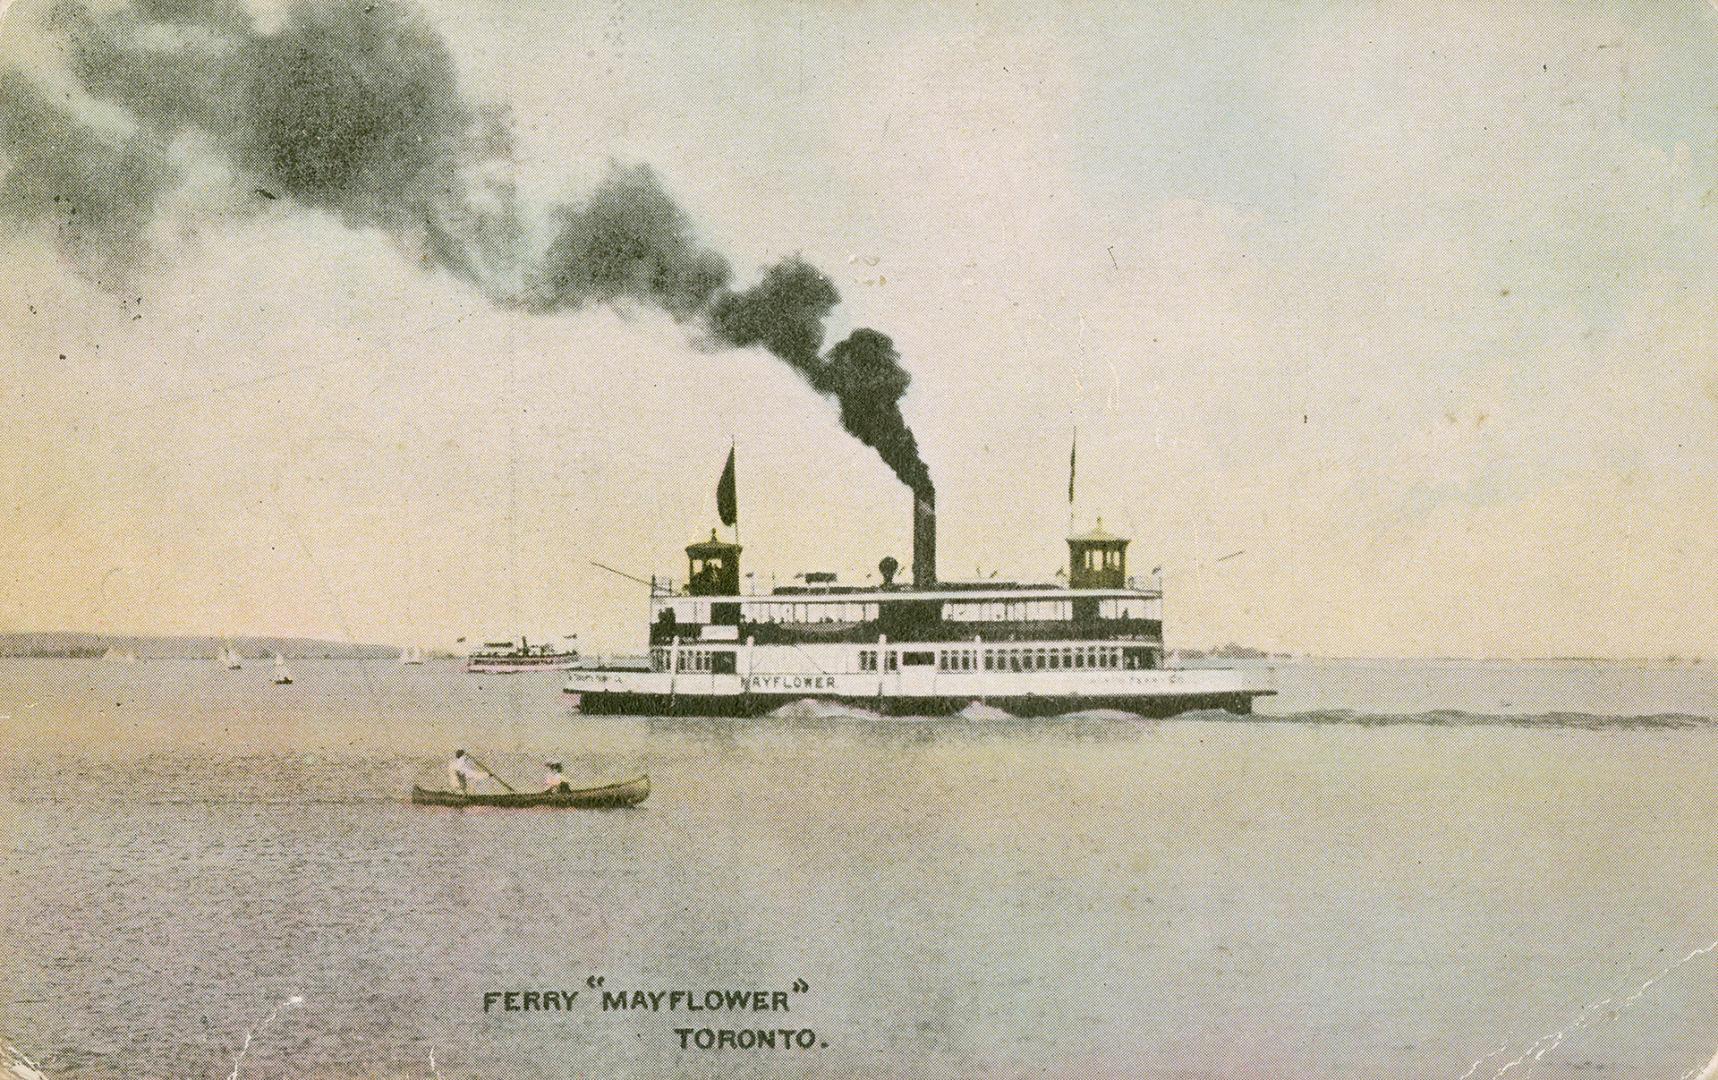 Image shows a lake view with a ferry boat in the background.